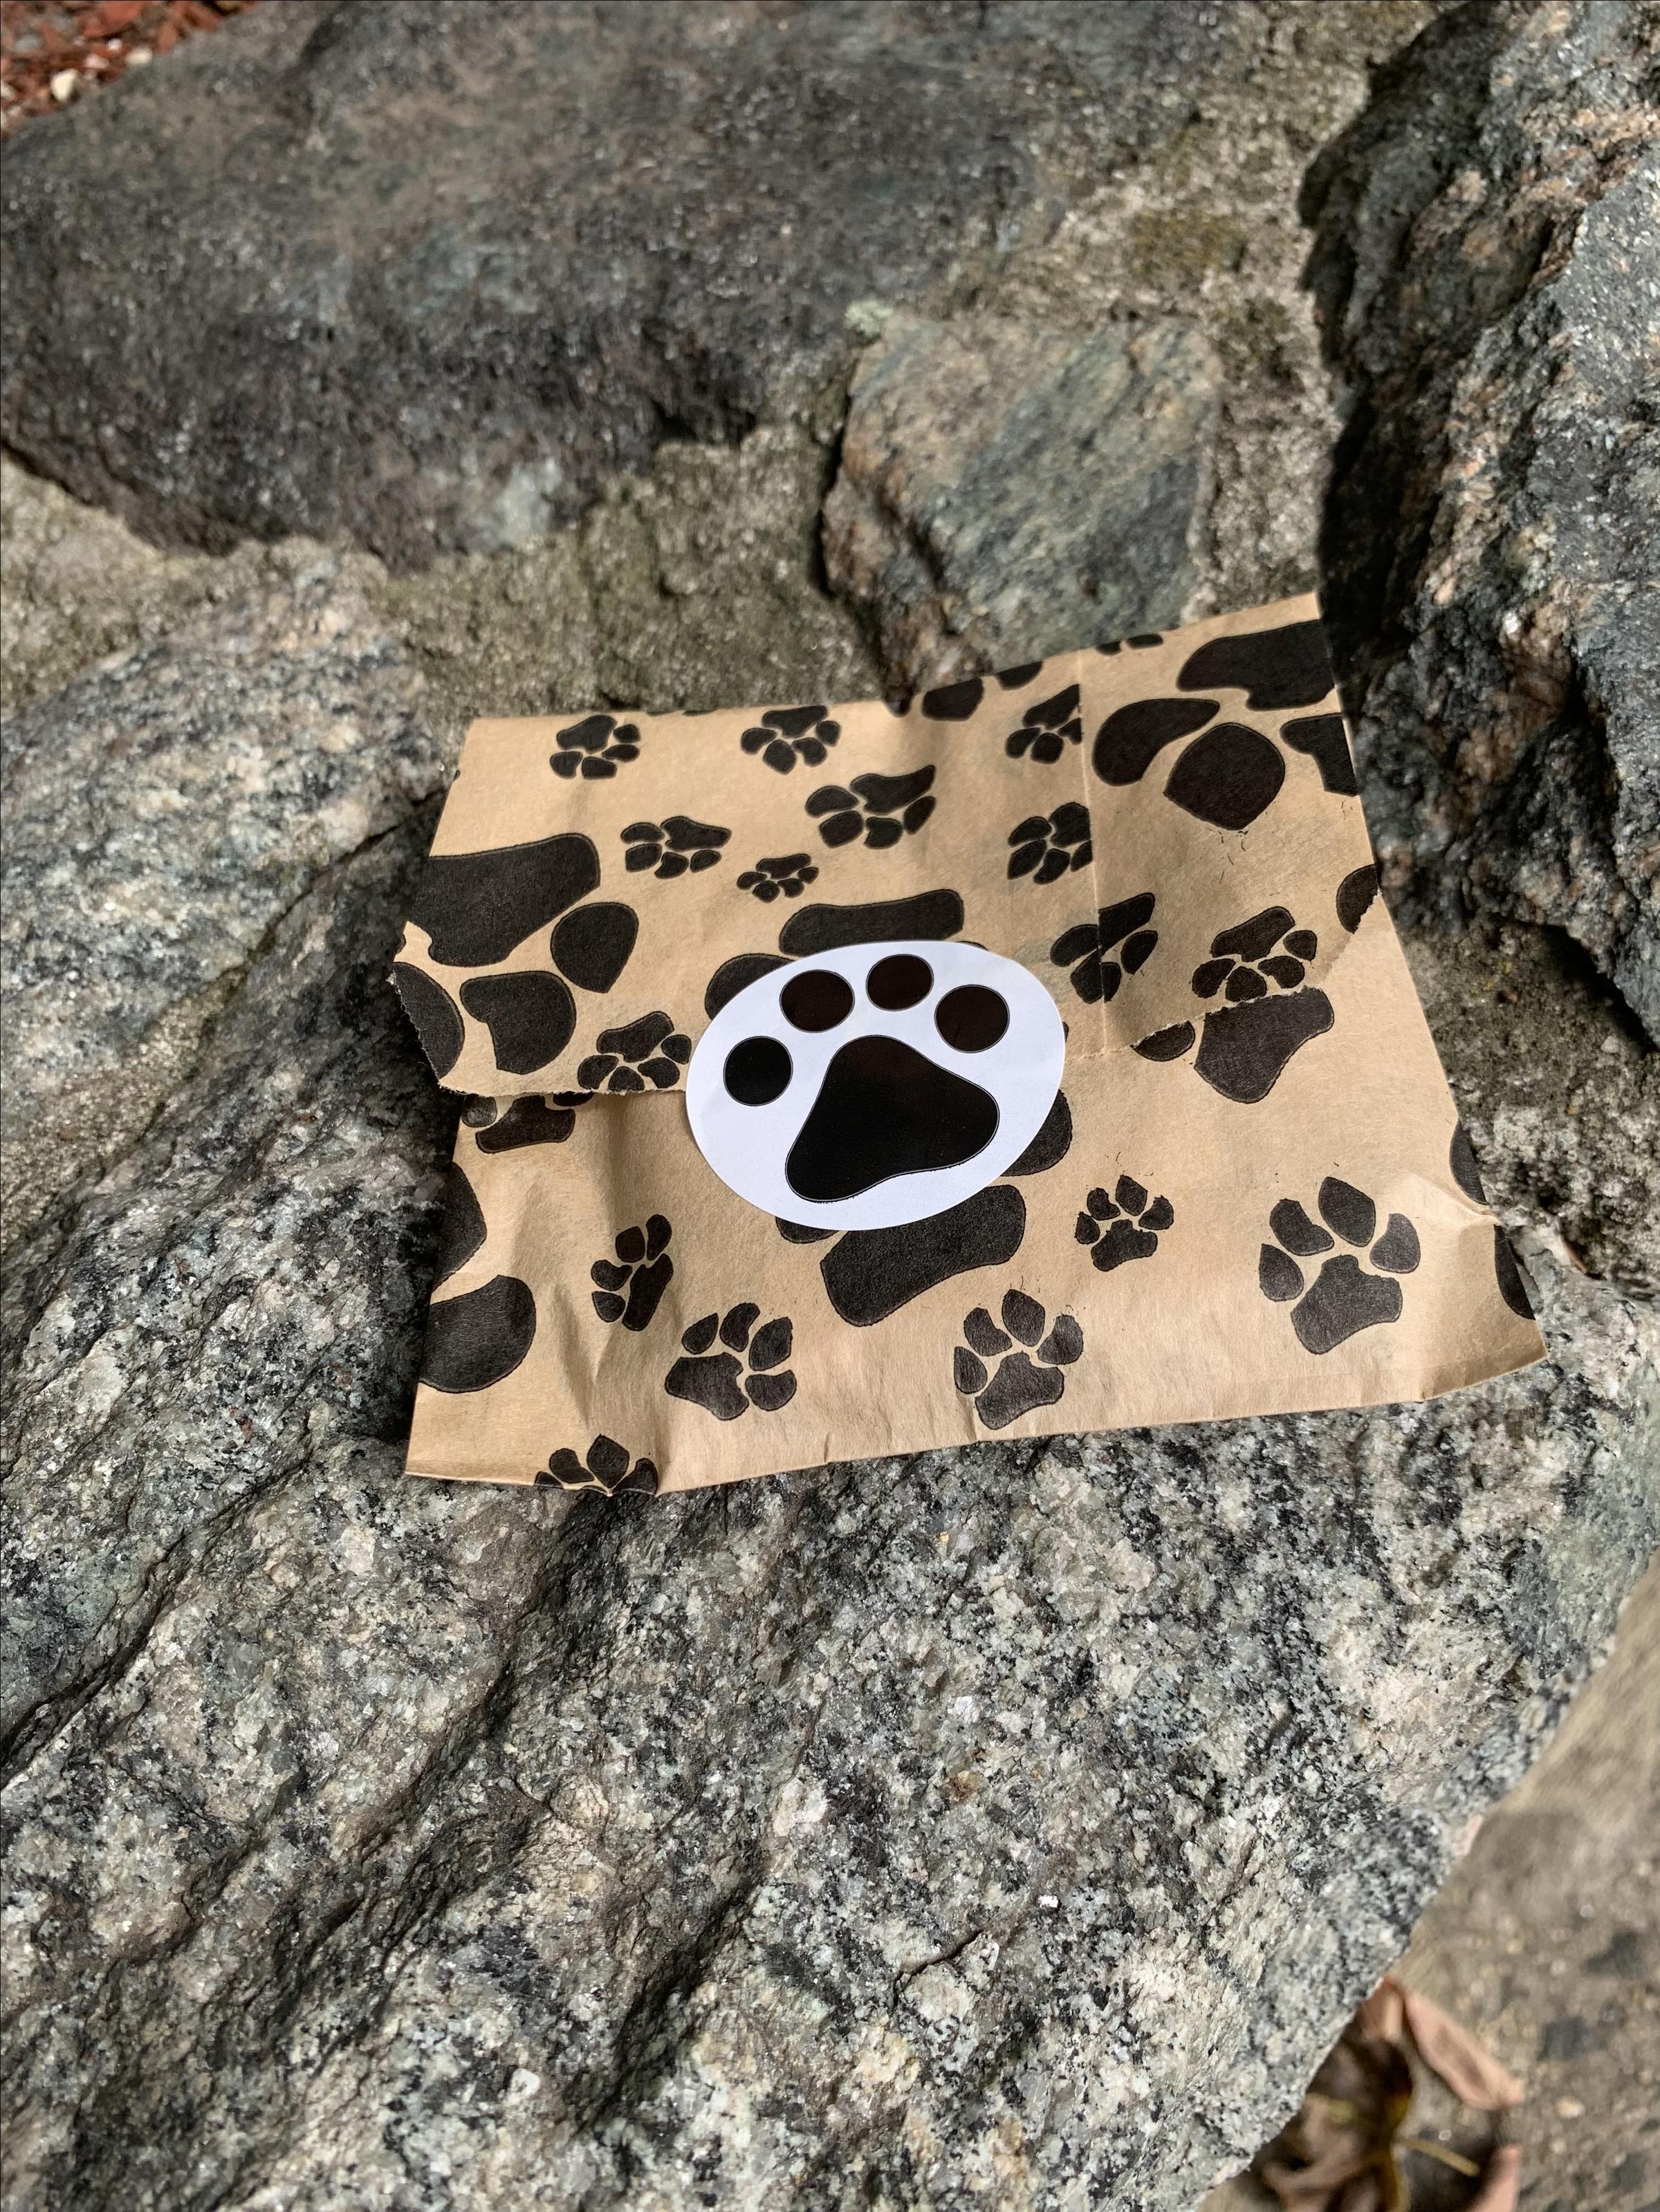 Black, White and Grey Cute Dog Paws Print. Wrapping Paper by